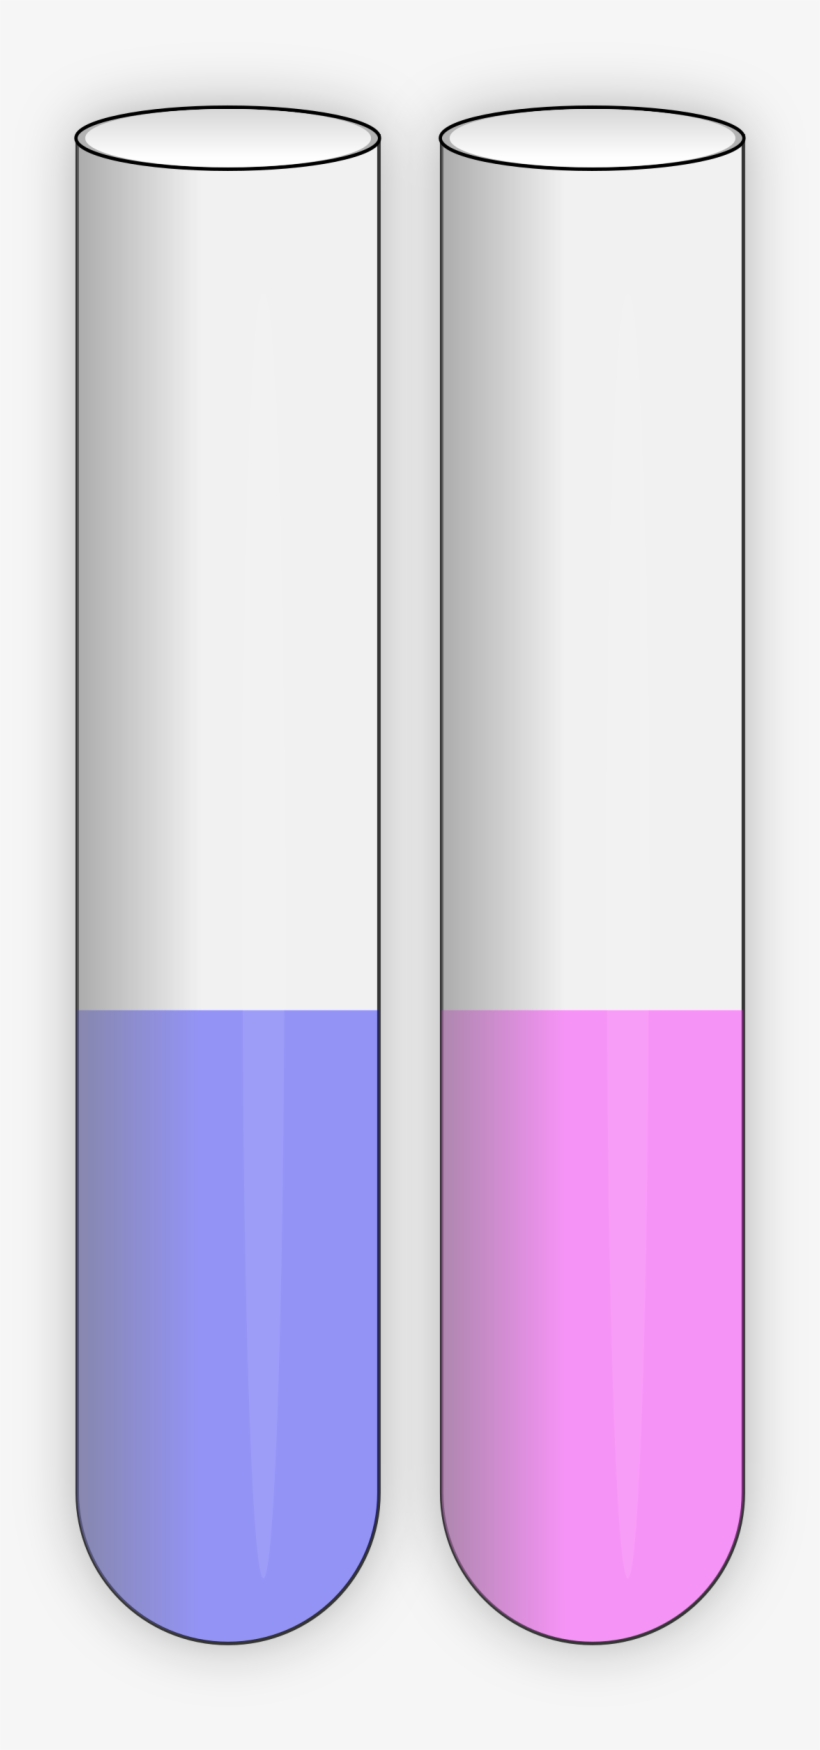 This Free Icons Png Design Of Test Tubes, transparent png #9640523